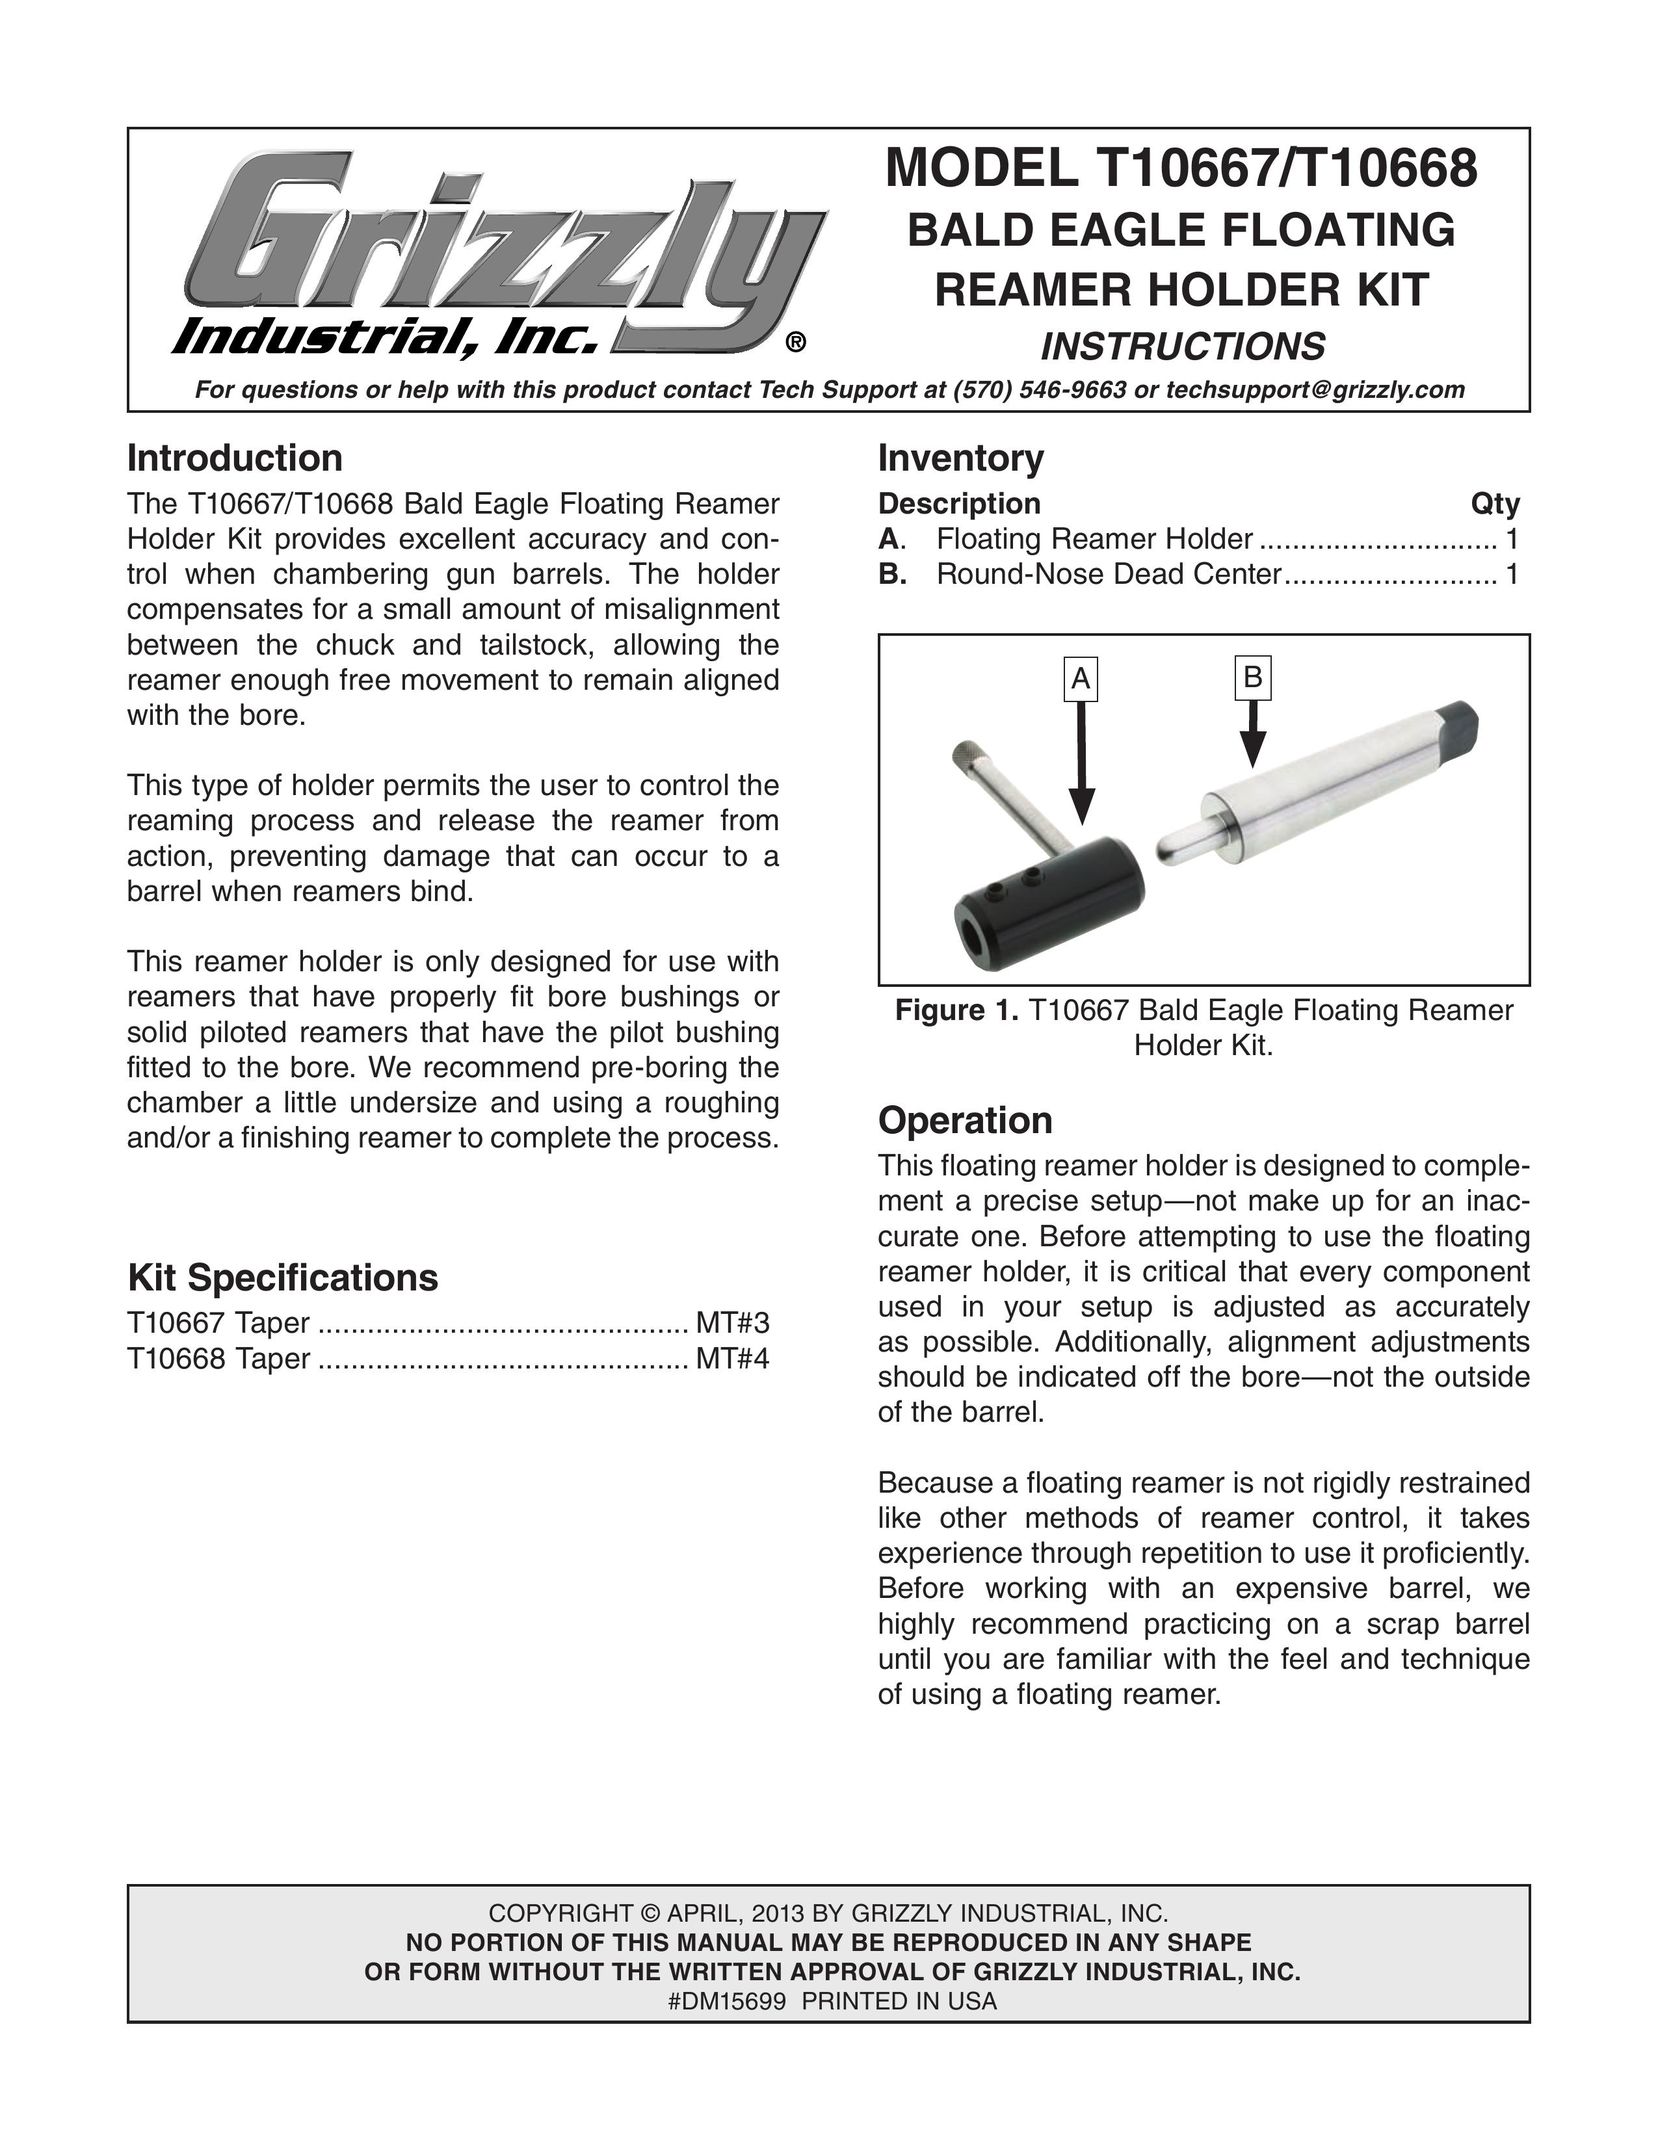 Grizzly T10667 Plumbing Product User Manual